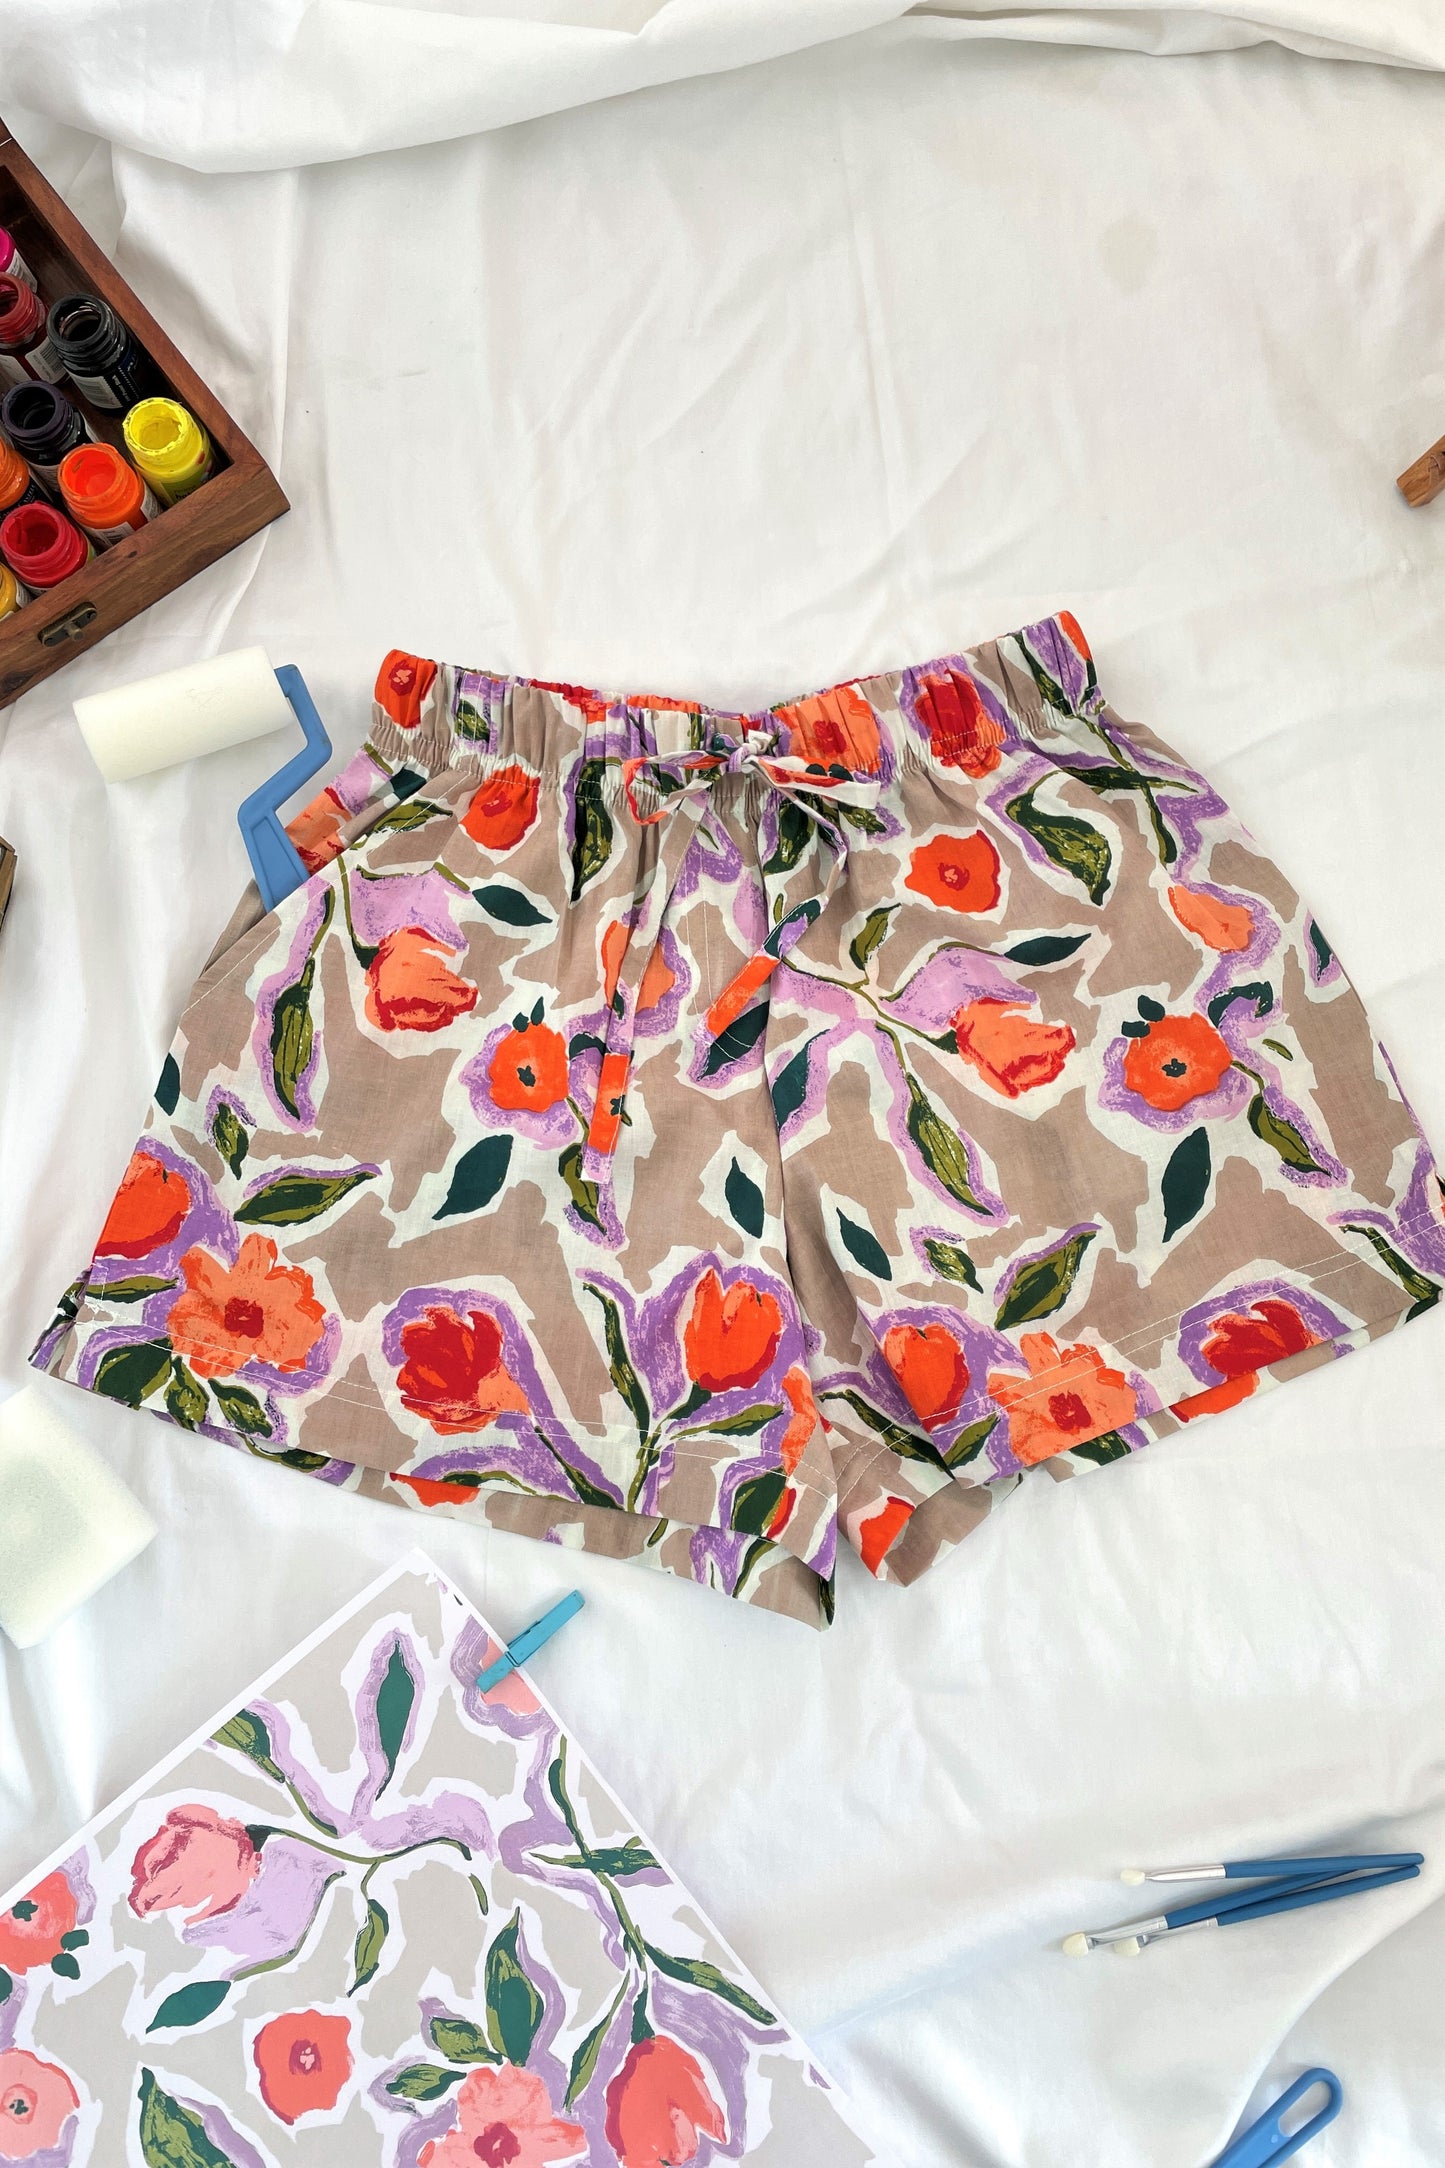 Women's Cotton Shorts Combo (Pack of 2) - Blotched Blossom